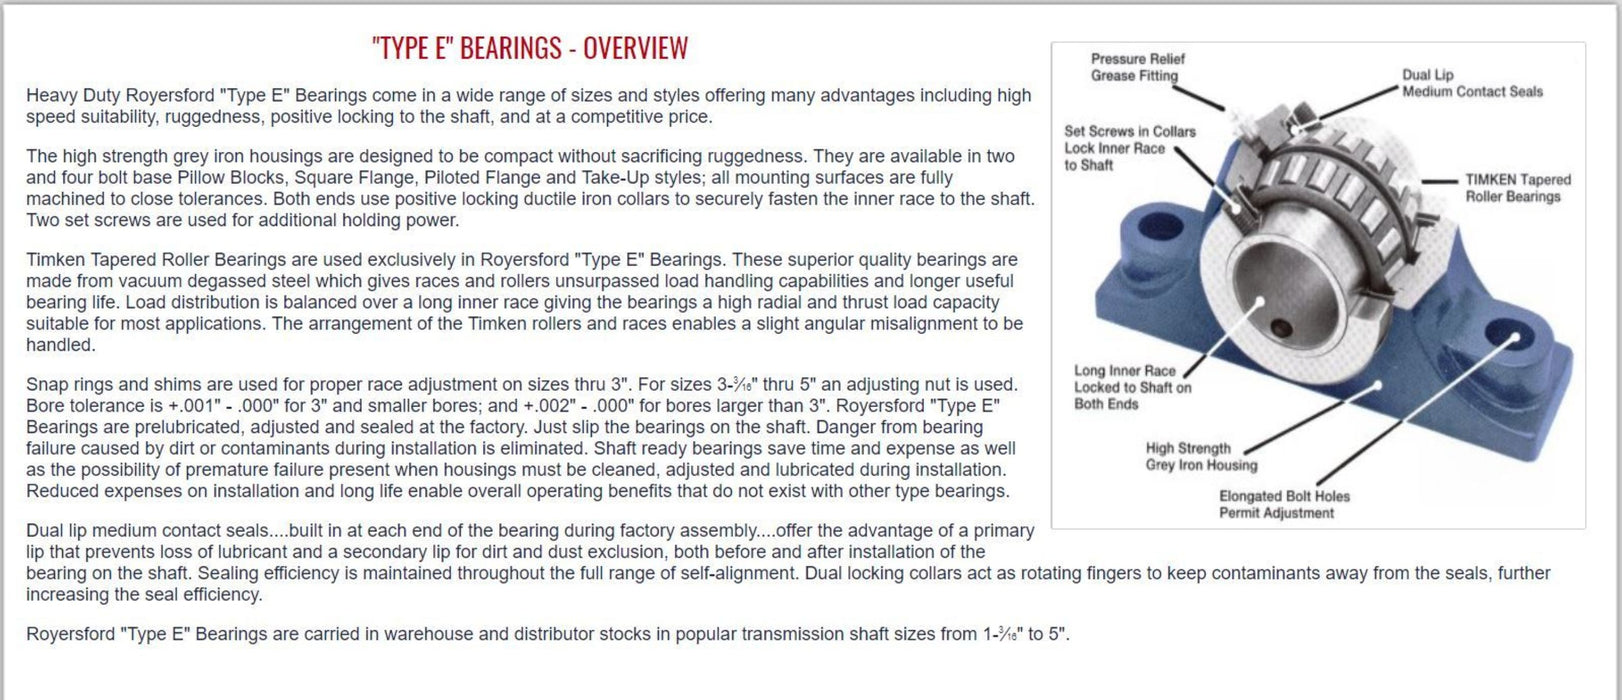 20-04-0408, Royersford Type E 4-Bolt Pillow Block Bearing, 4-1/2" with Timken Tapered Roller Bearings